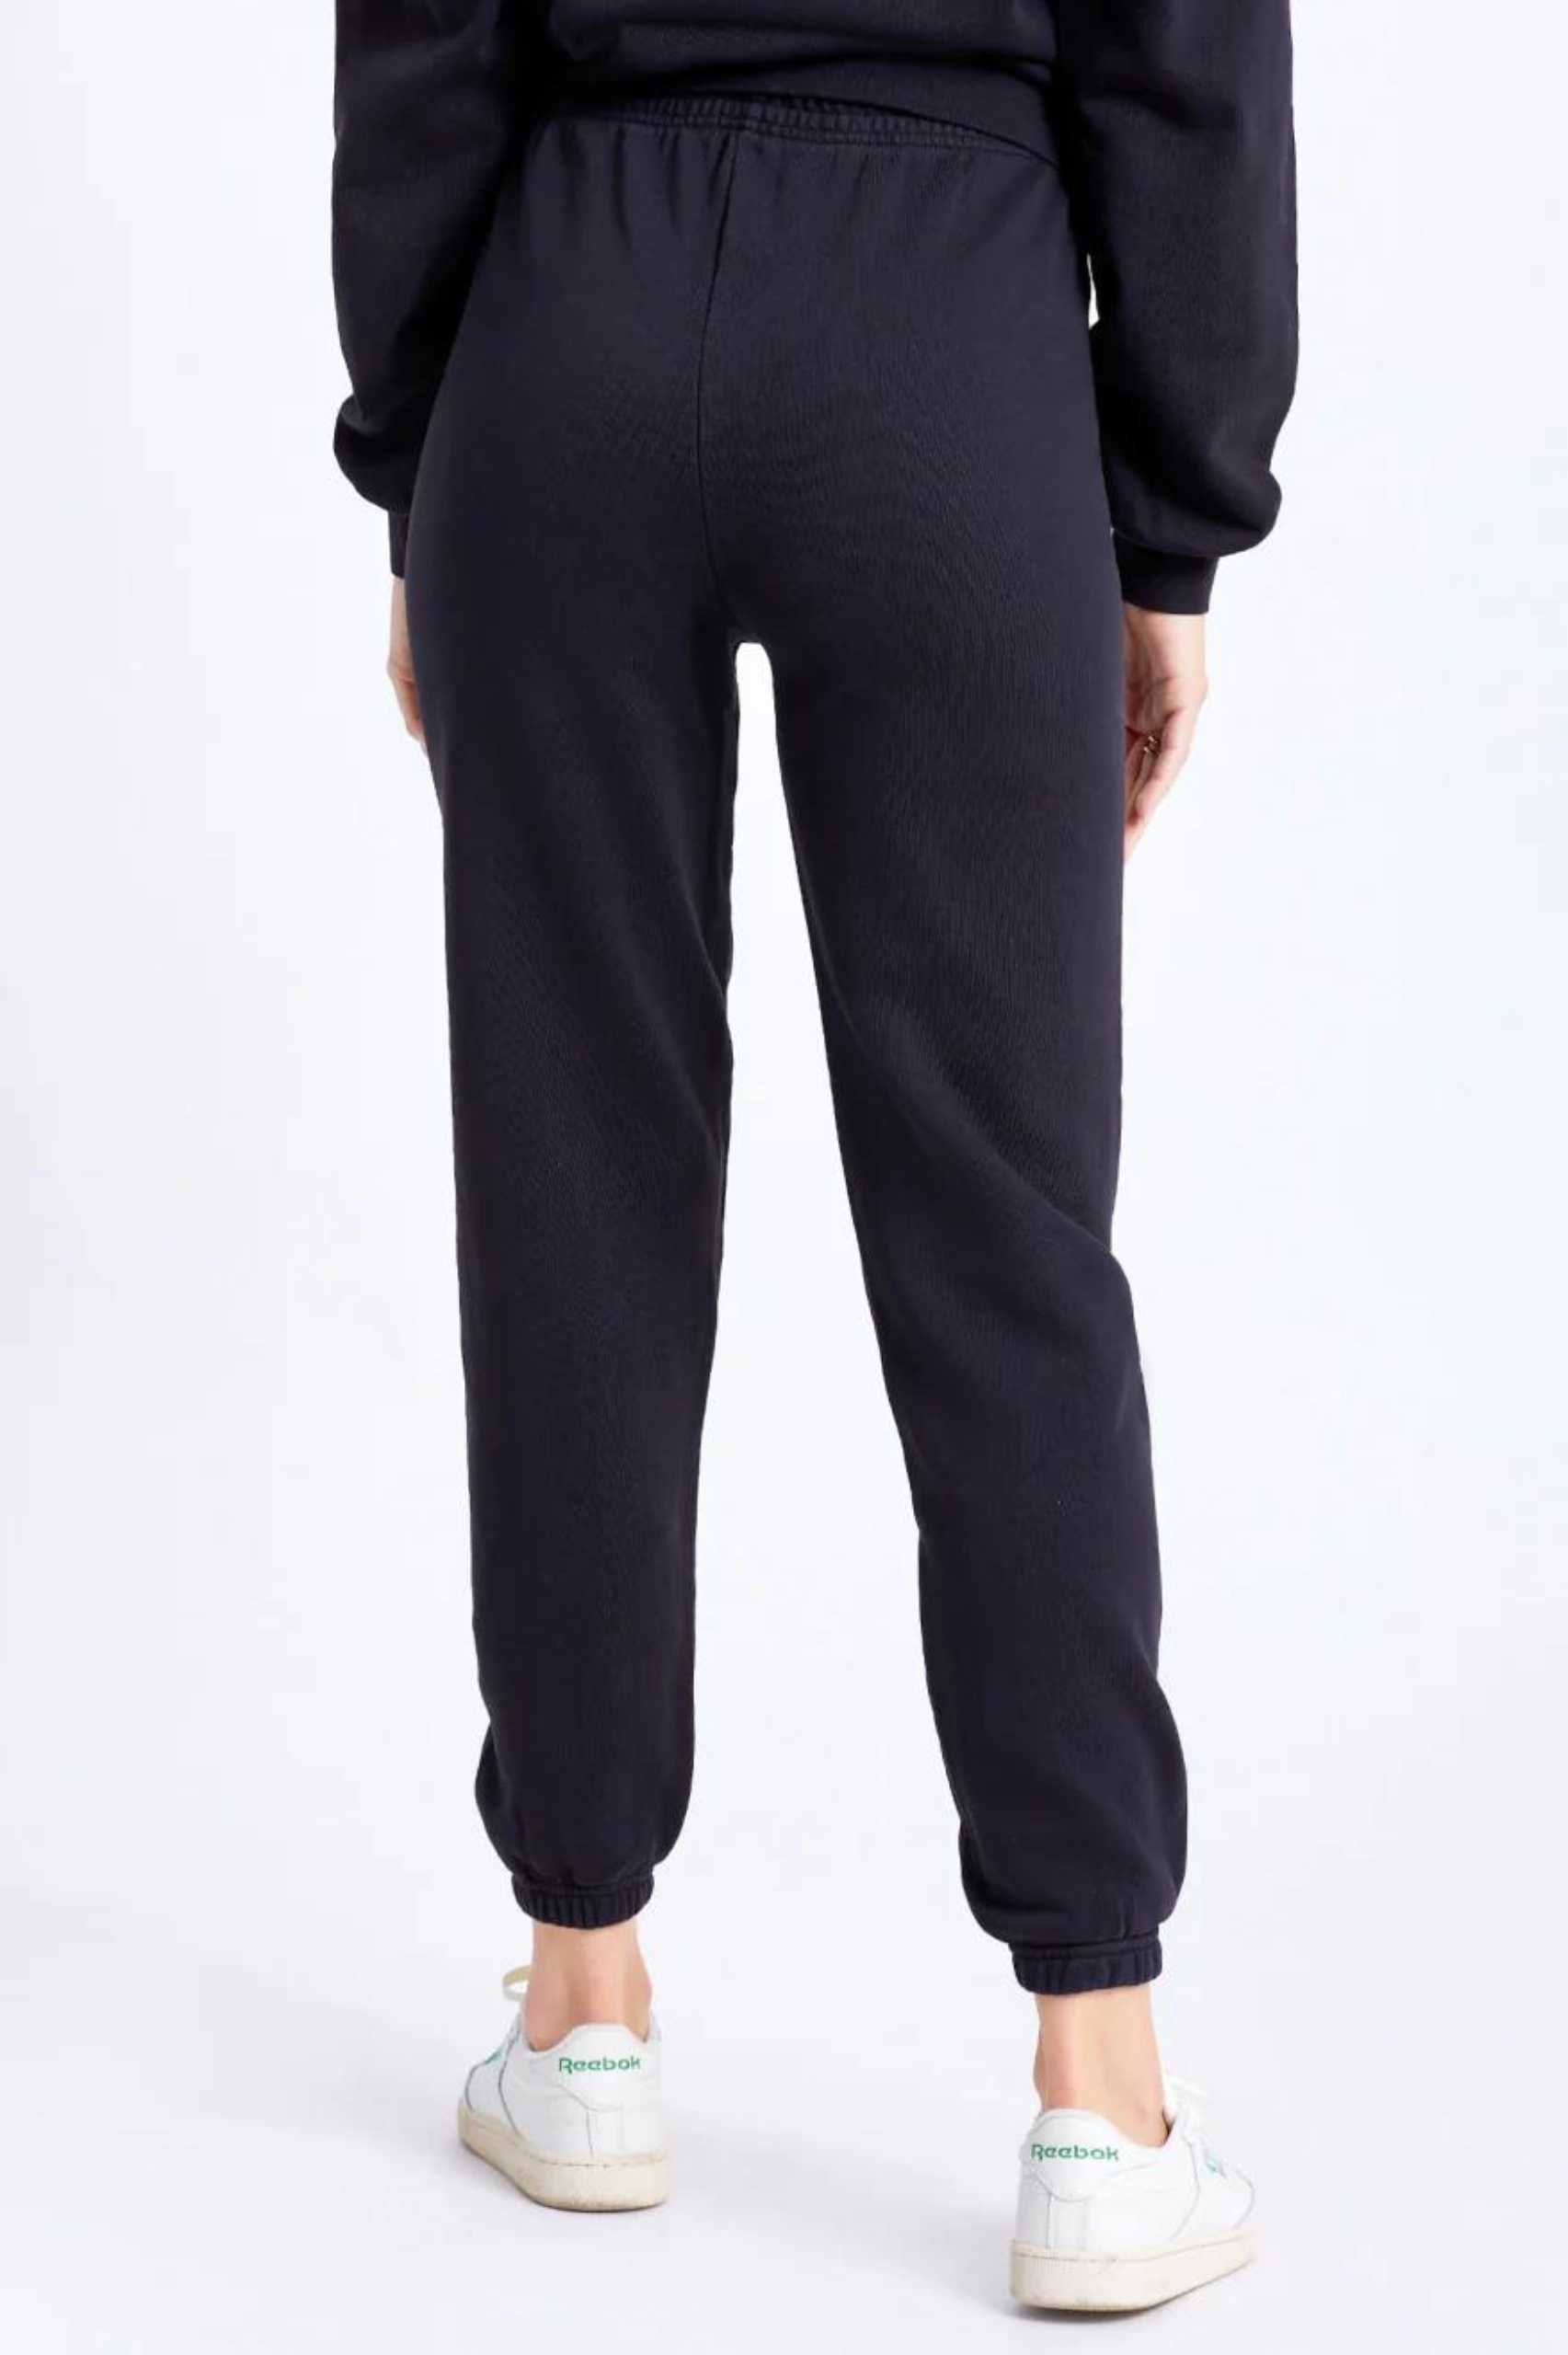 Brixton Womens Vintage French Terry Dye Sweatpant in Black